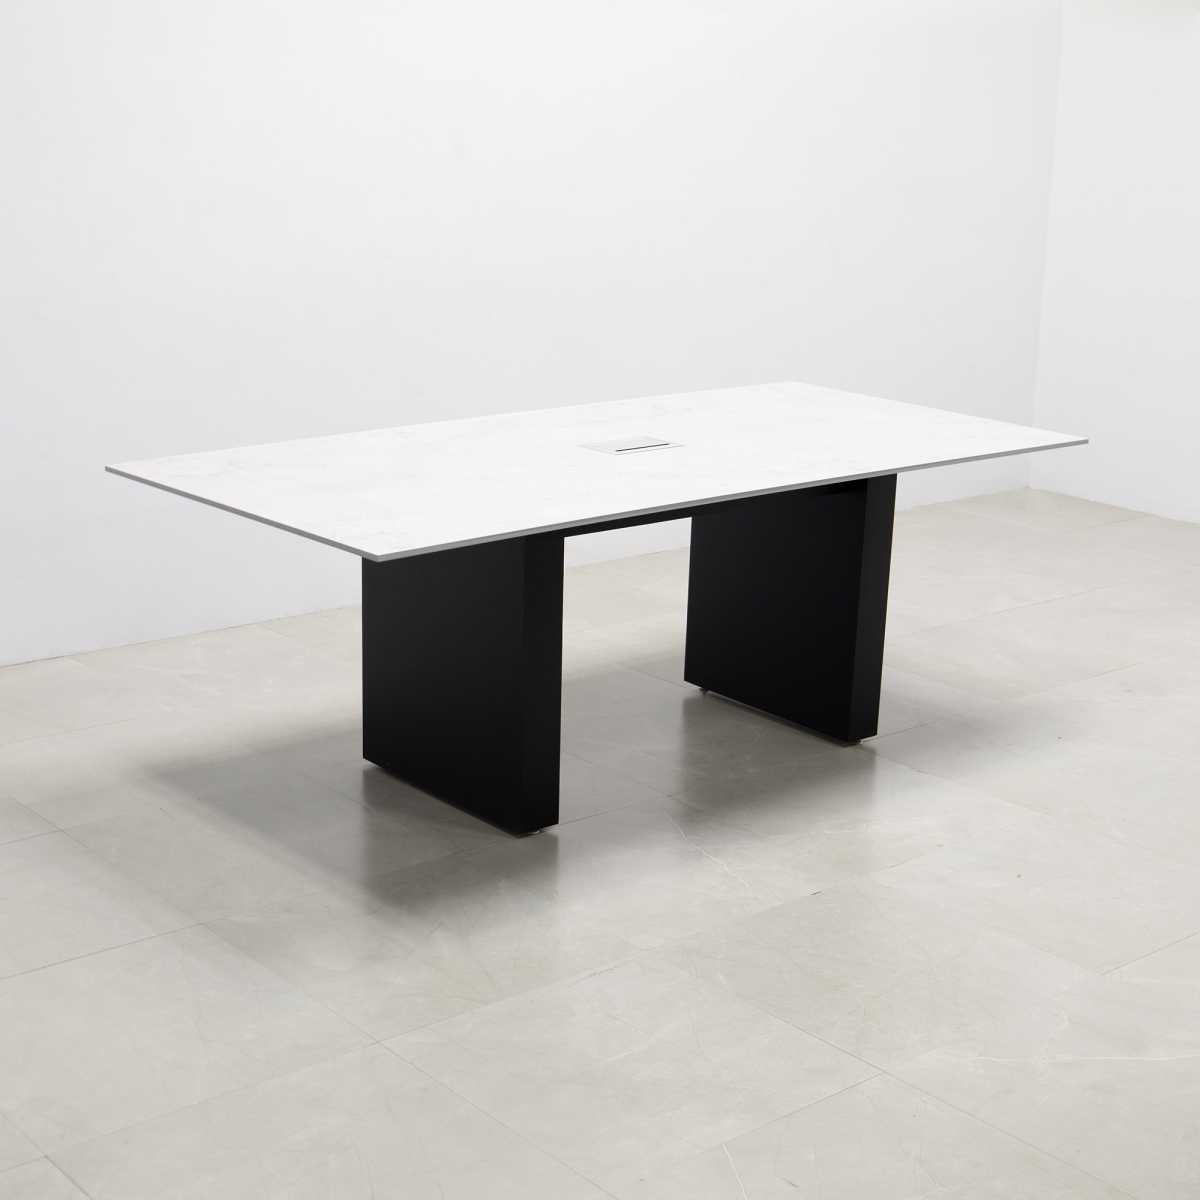 84 In. Axis Rectangular Conference Table- Stock #1003-S